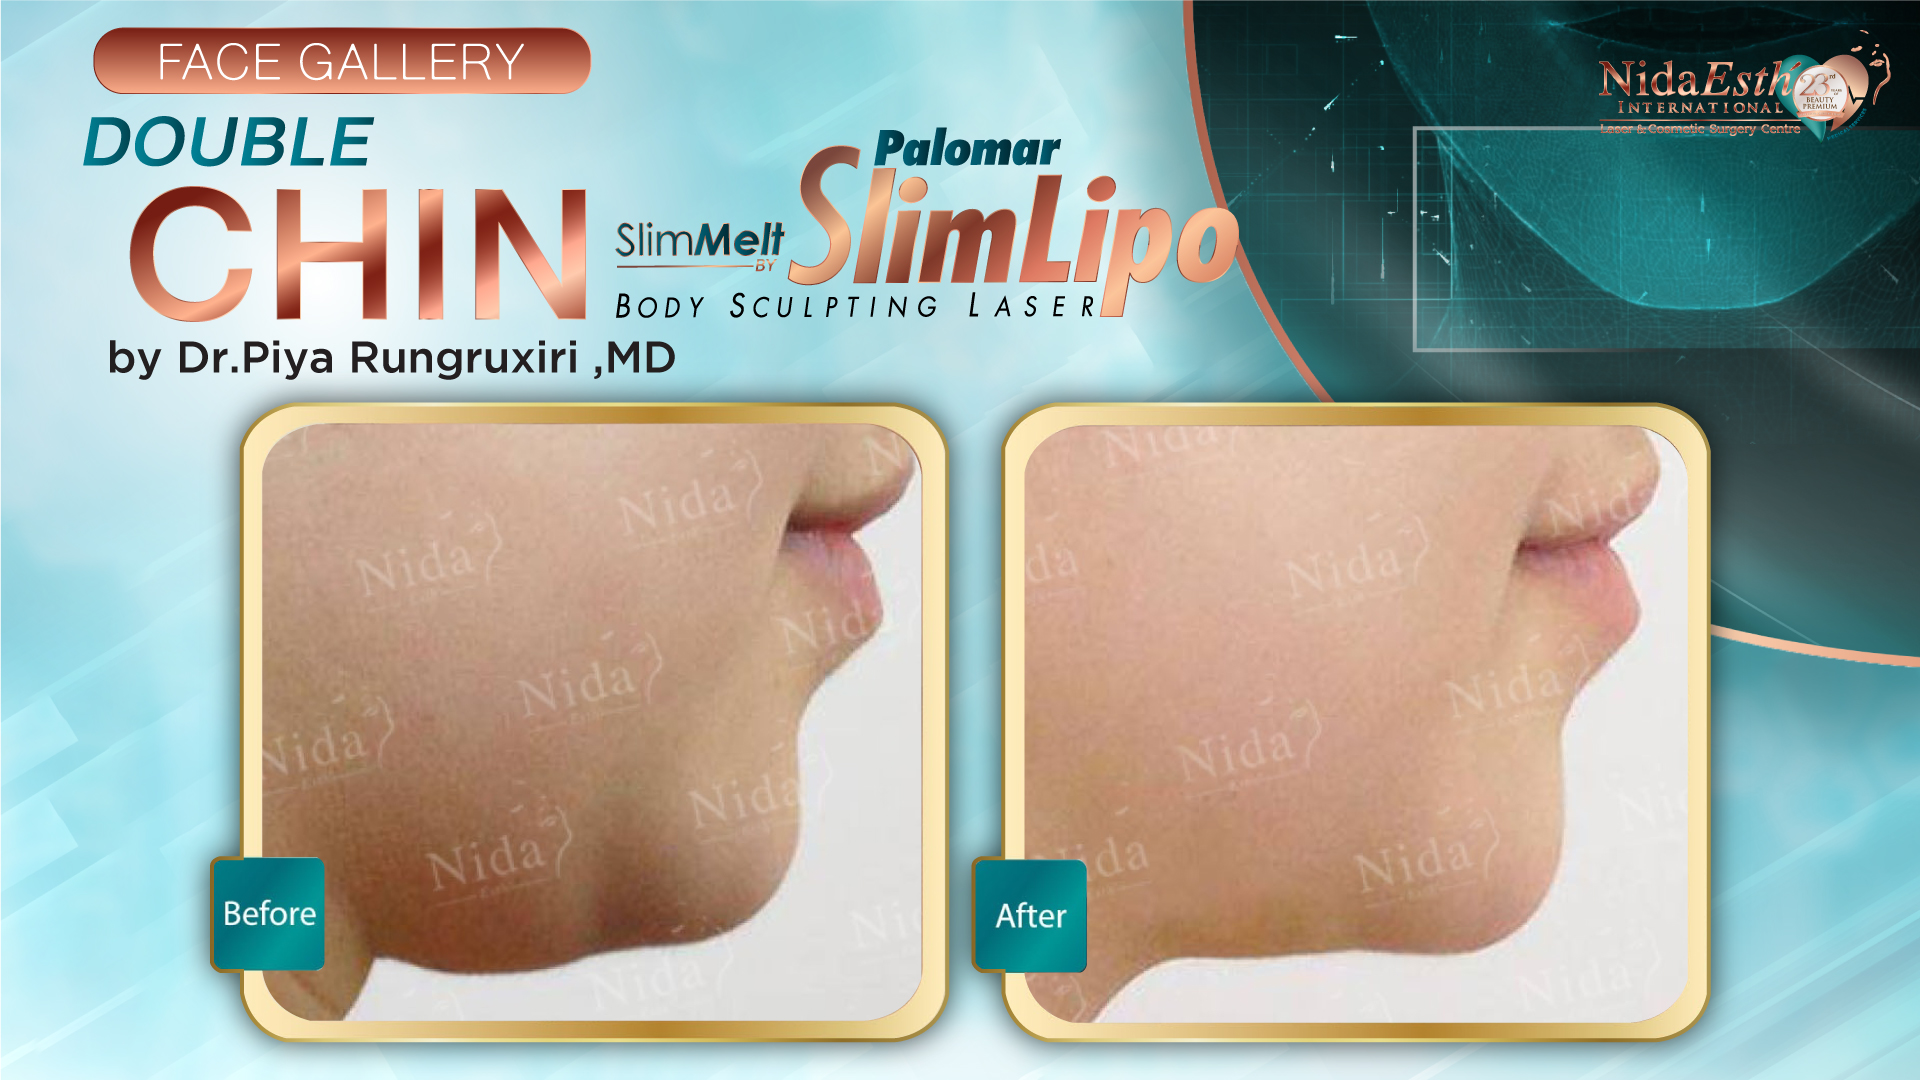 Double Chin Liposuction by Slim Melt